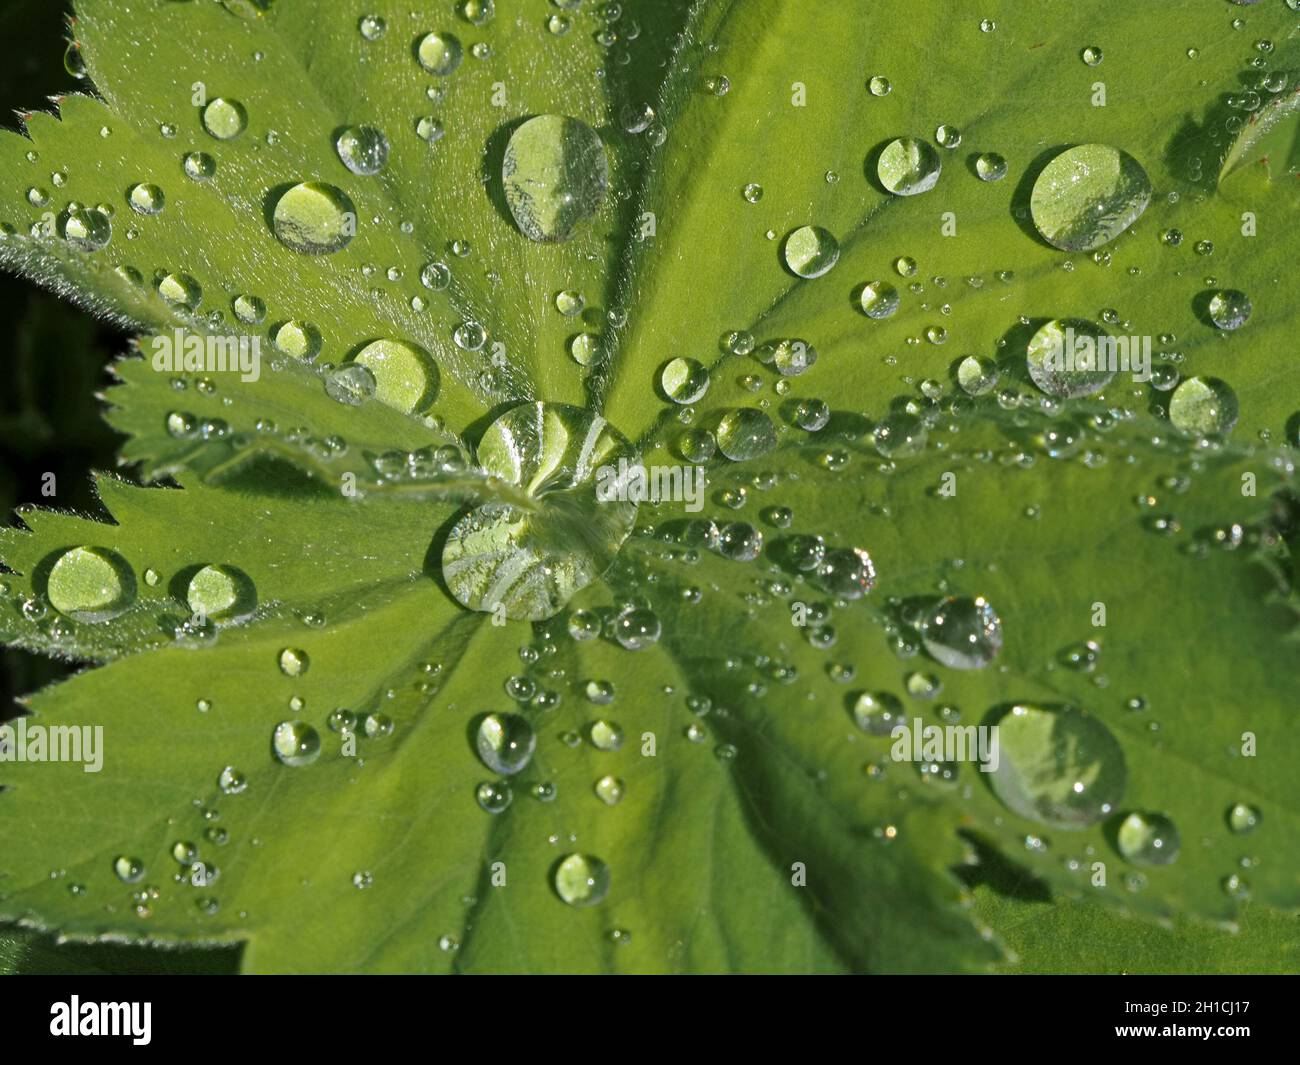 well-lit close-up image of bright silver drops of water retained by green hairy leaf of Alchemilla Mollis, 'Lady's Mantle' in garden in Cumbria, UK Stock Photo